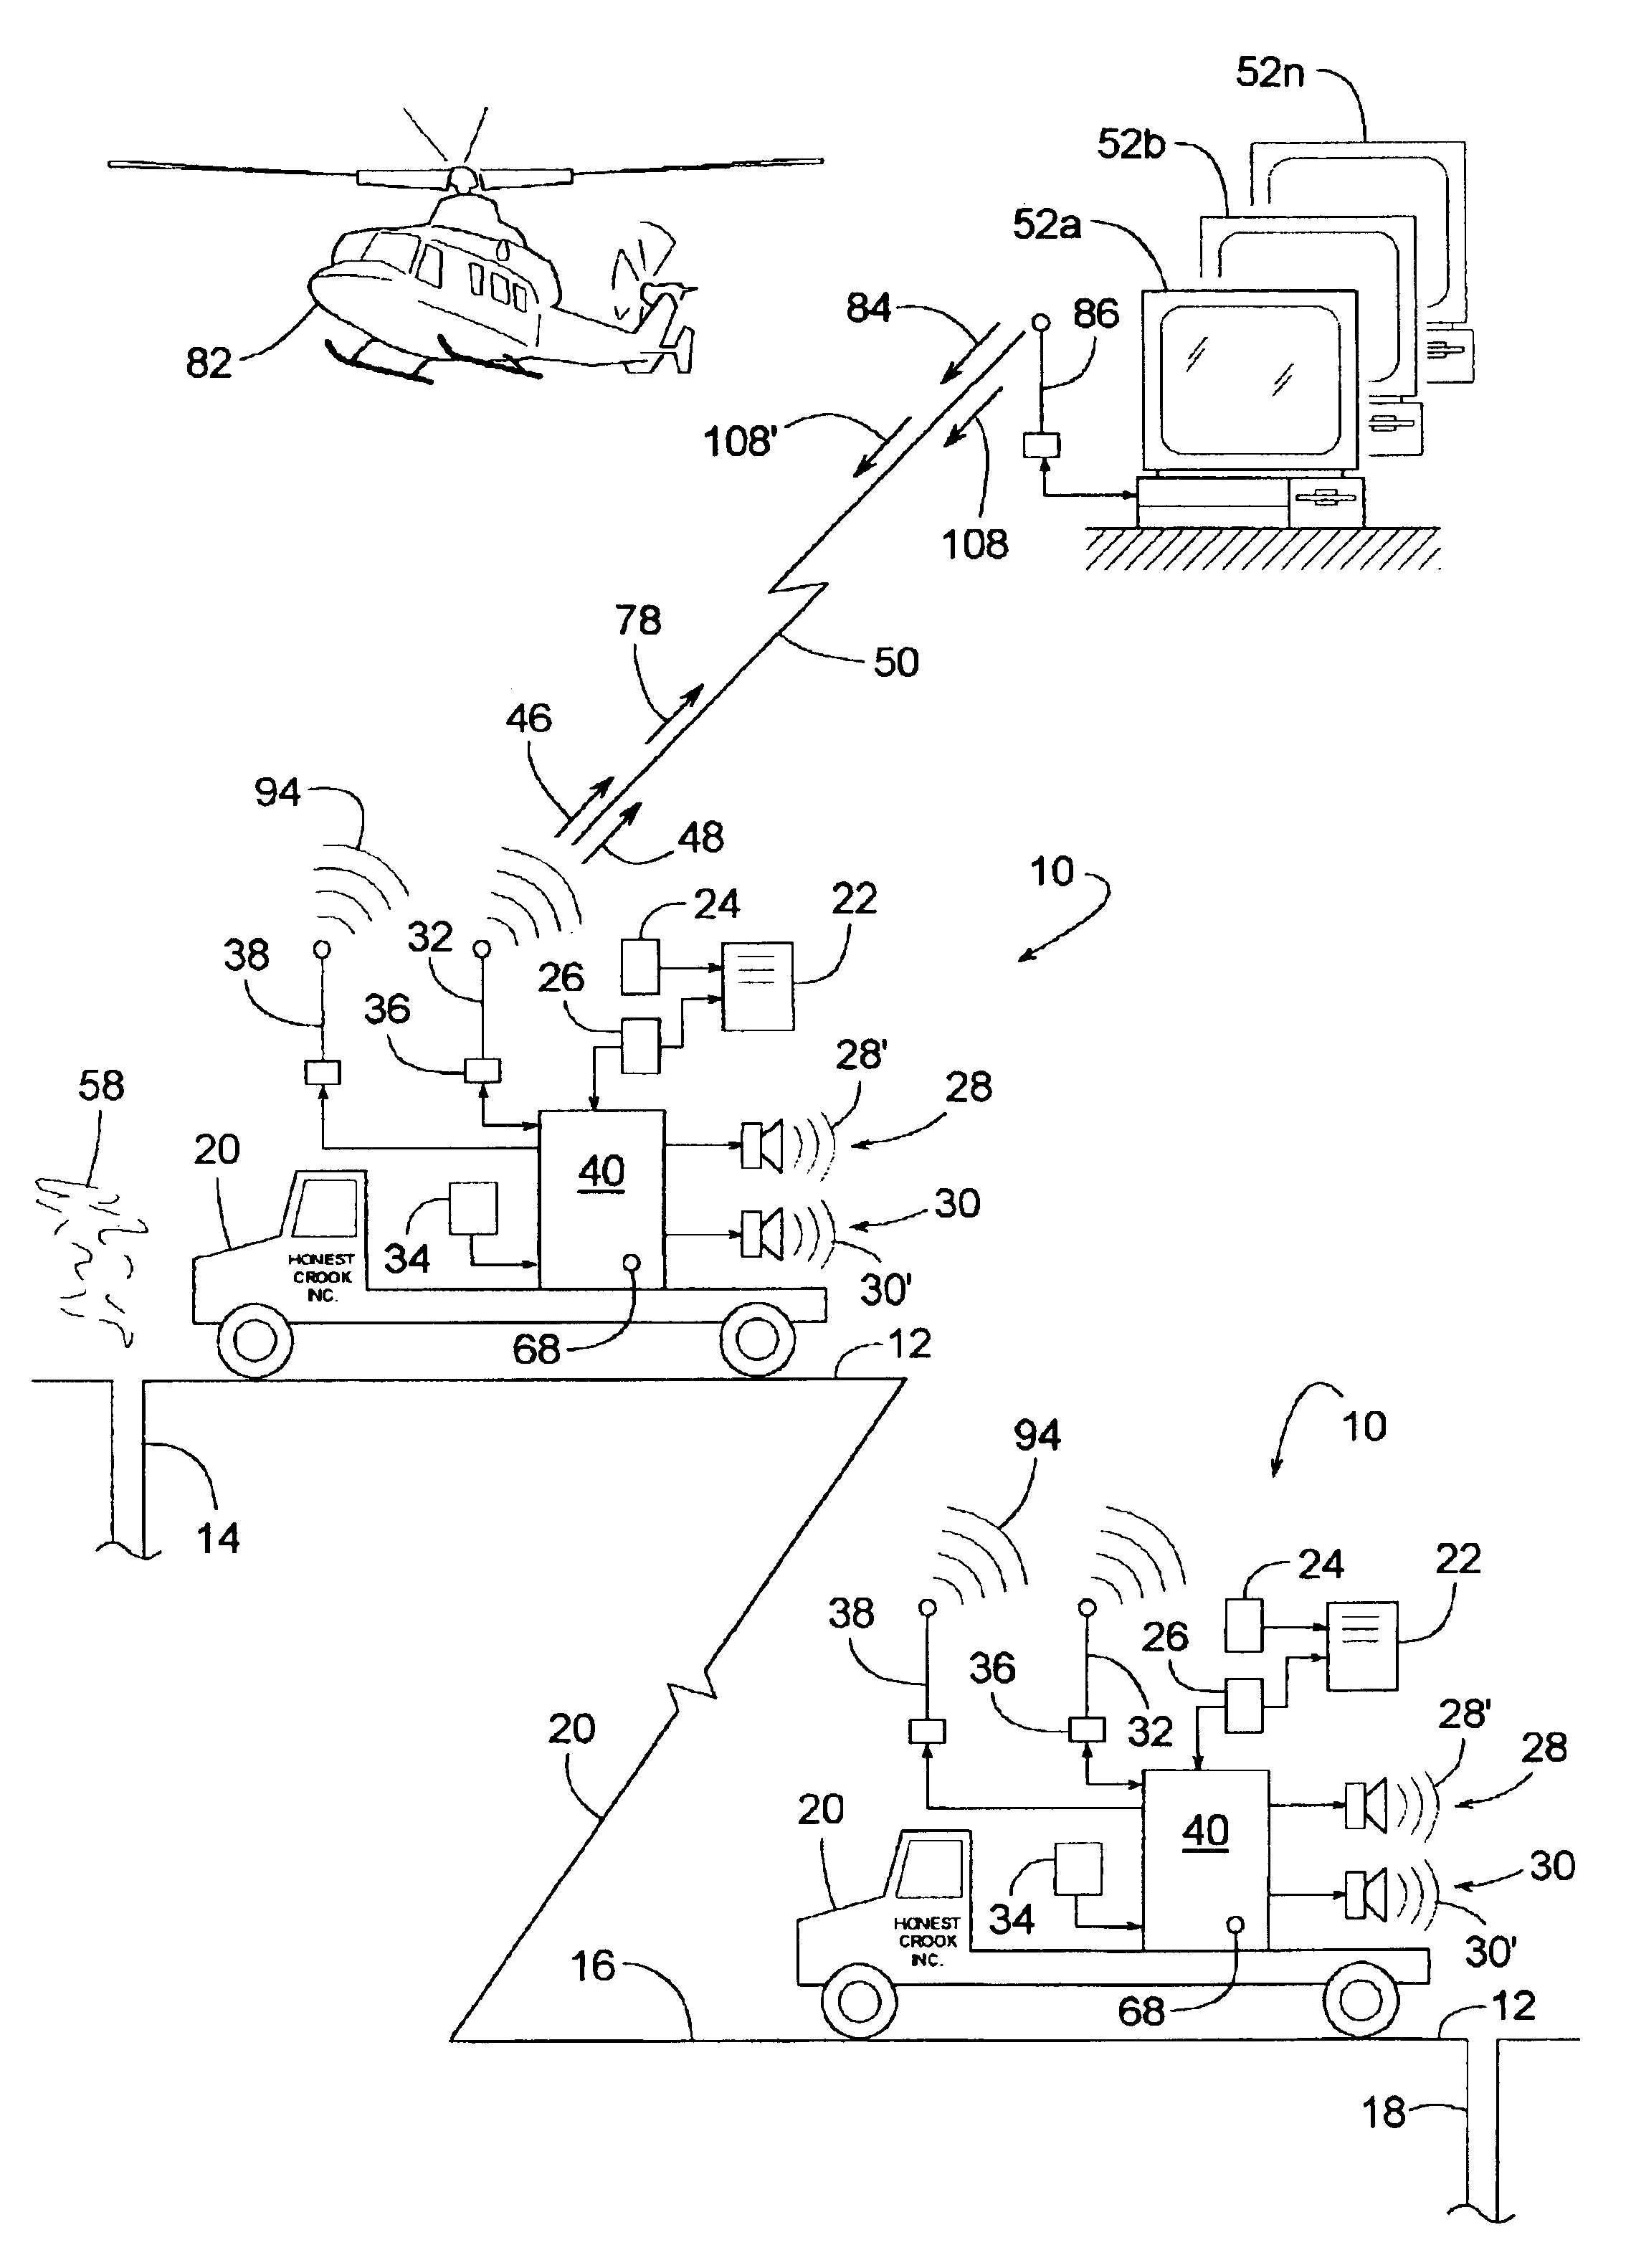 Mobile system for responding to hydrogen sulfide gas at a plurality of remote well sites